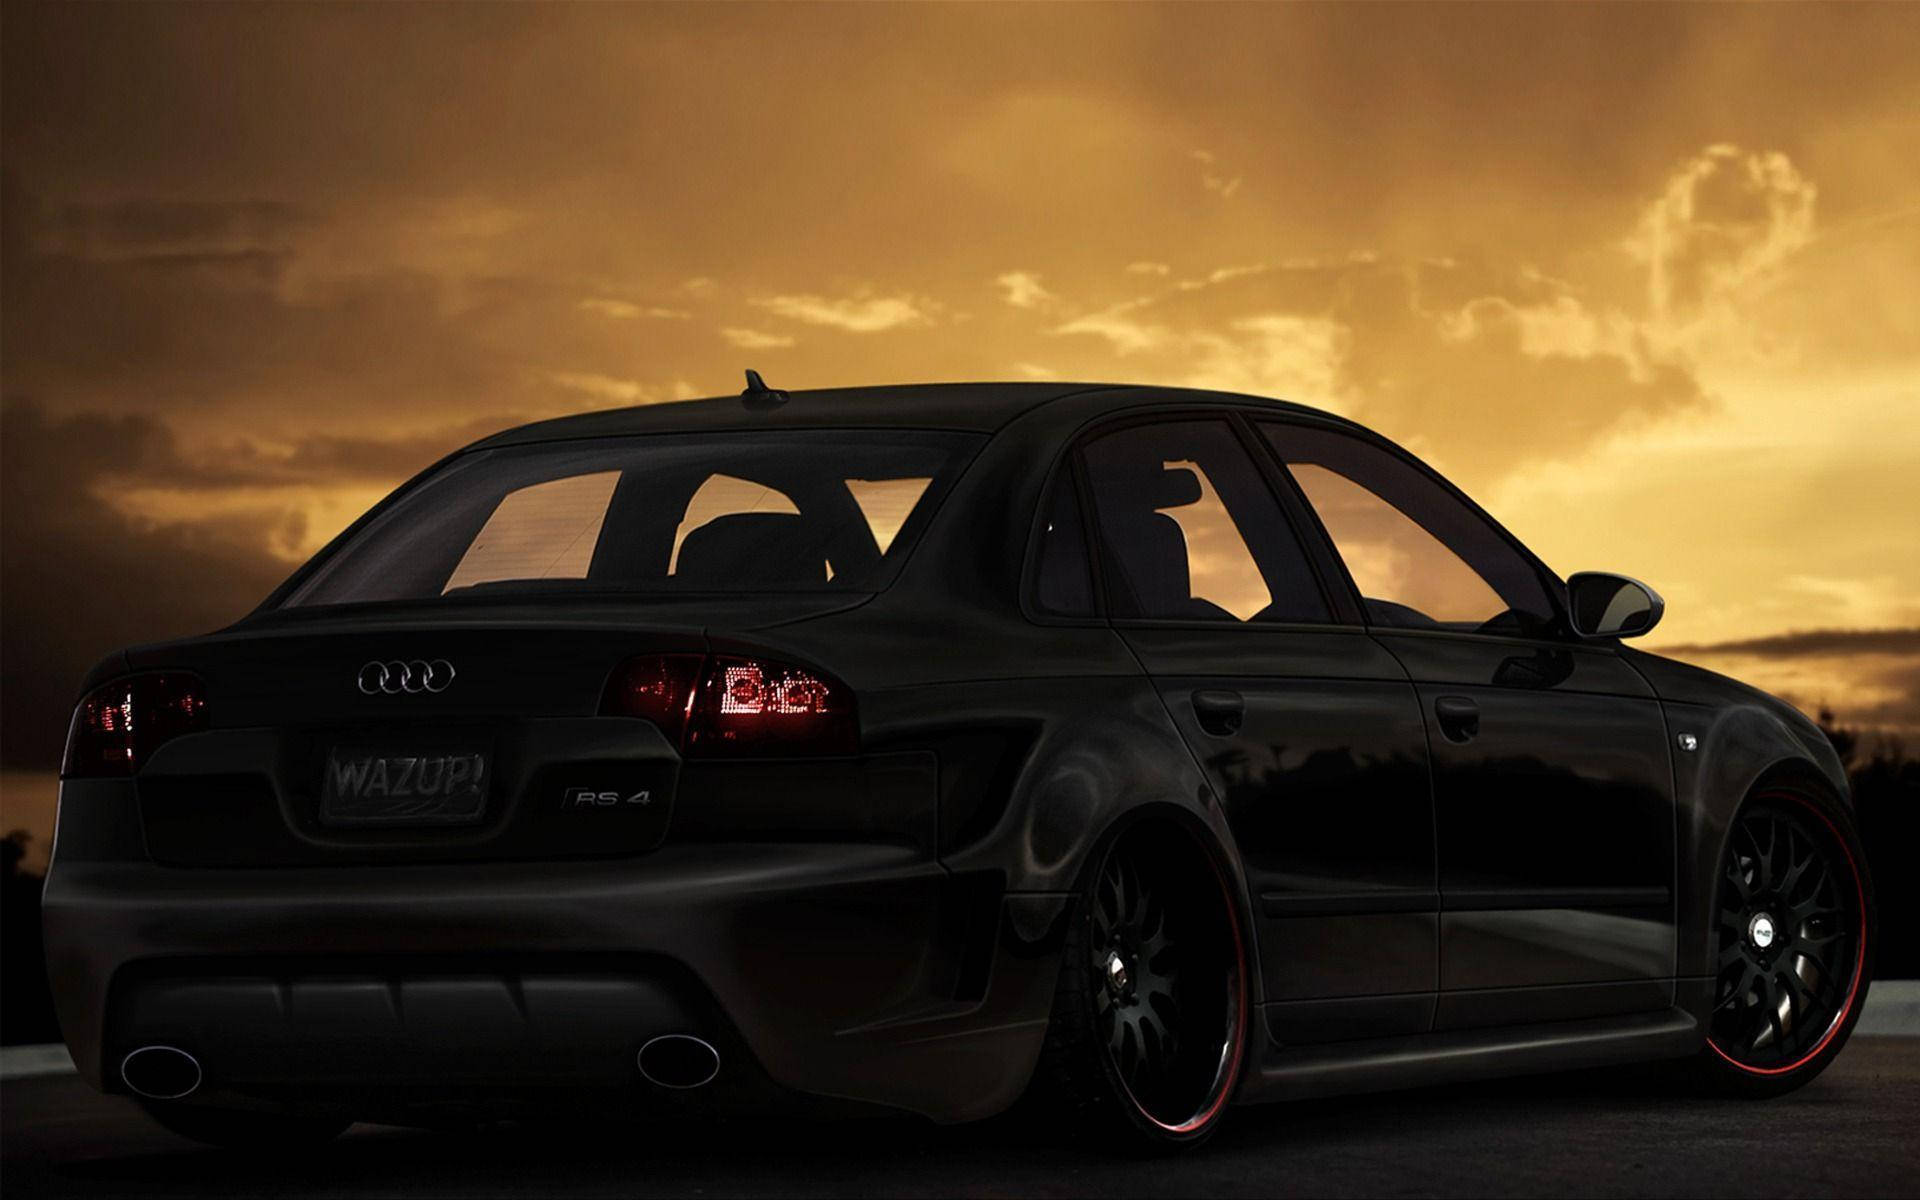 Silhouette Of The 2007 Audi Rs 4